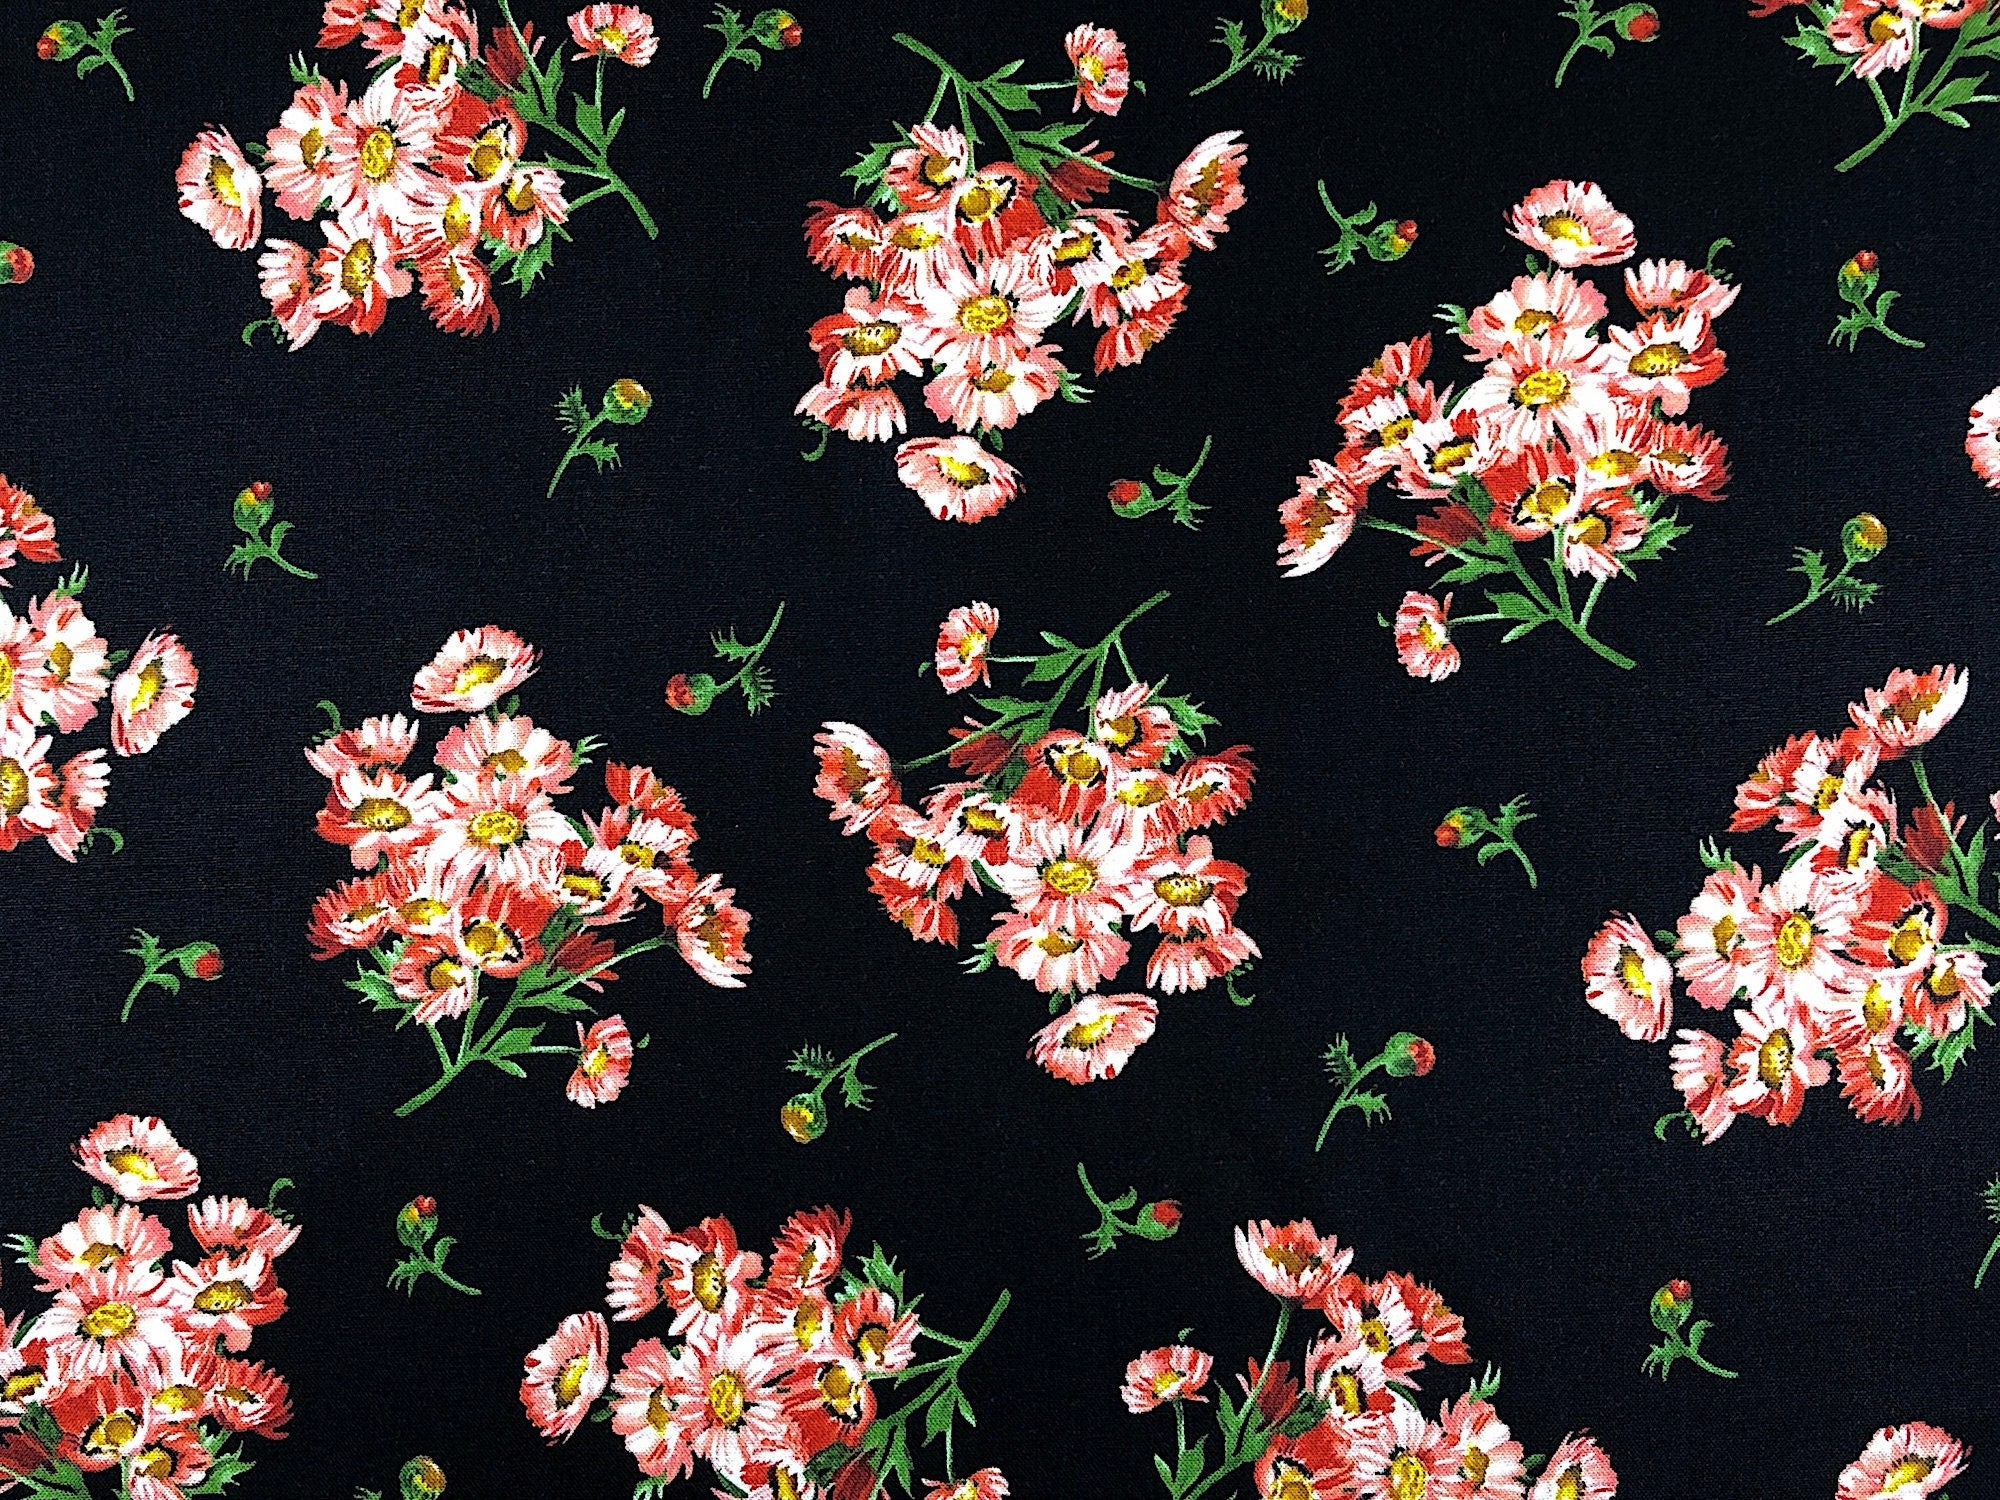 This black fabric is called Prose and is covered with peach colored flowers